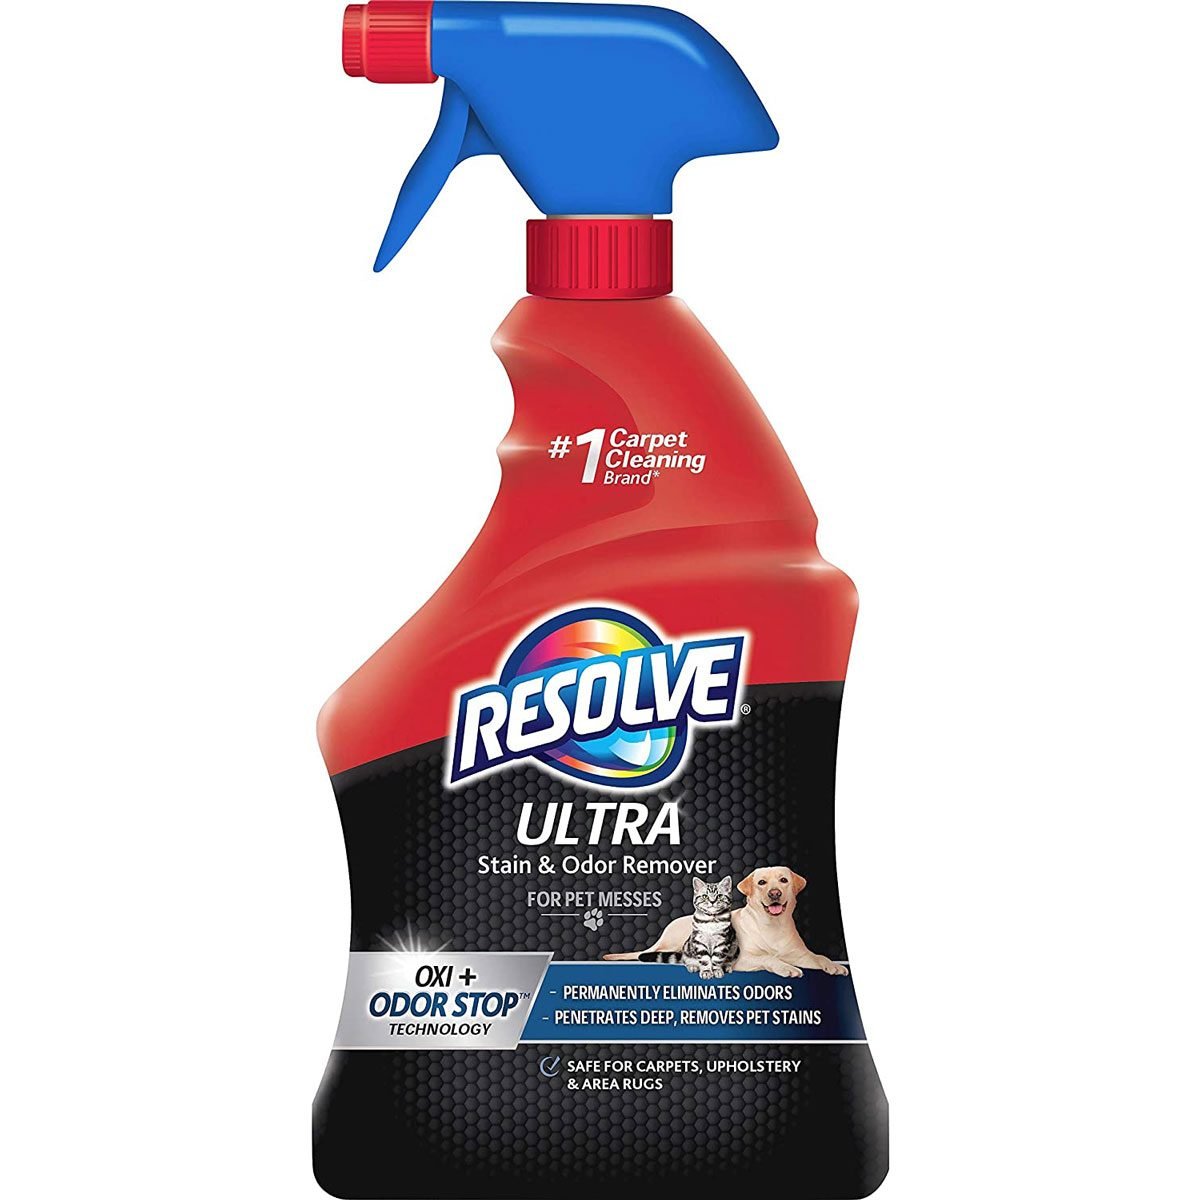 Best carpet cleaner for pet stains